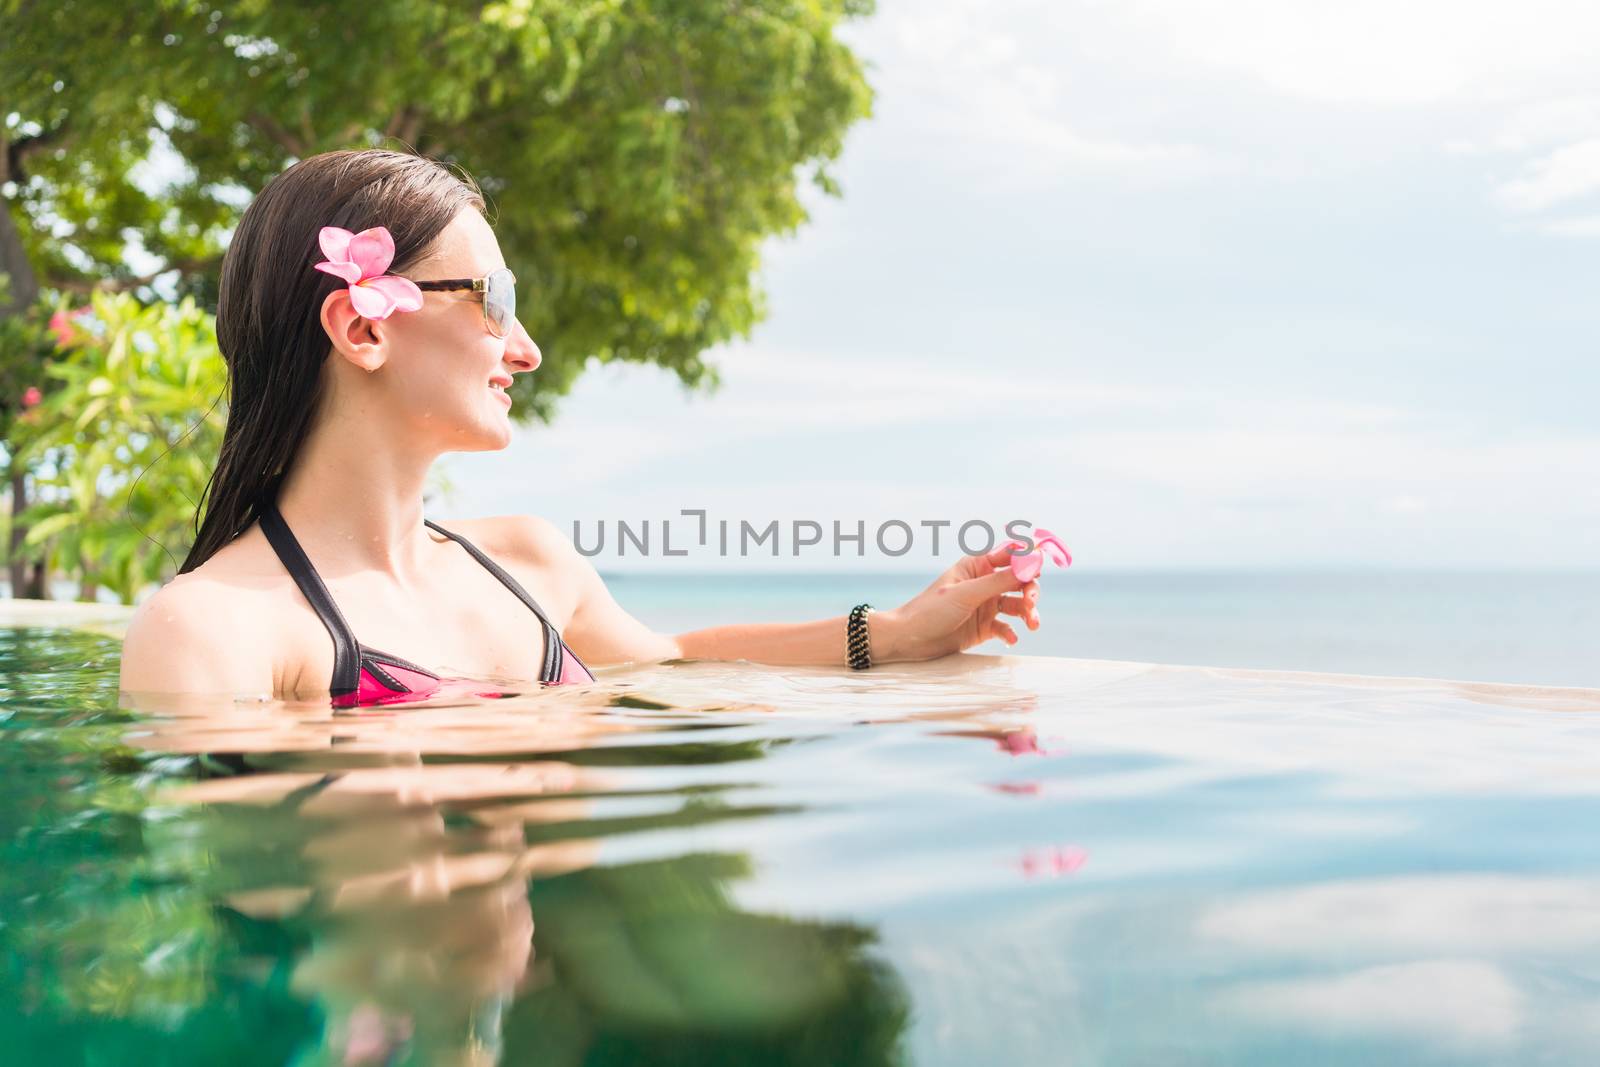 Woman in summer vacation relaxing swimming in pool with the ocean in the background